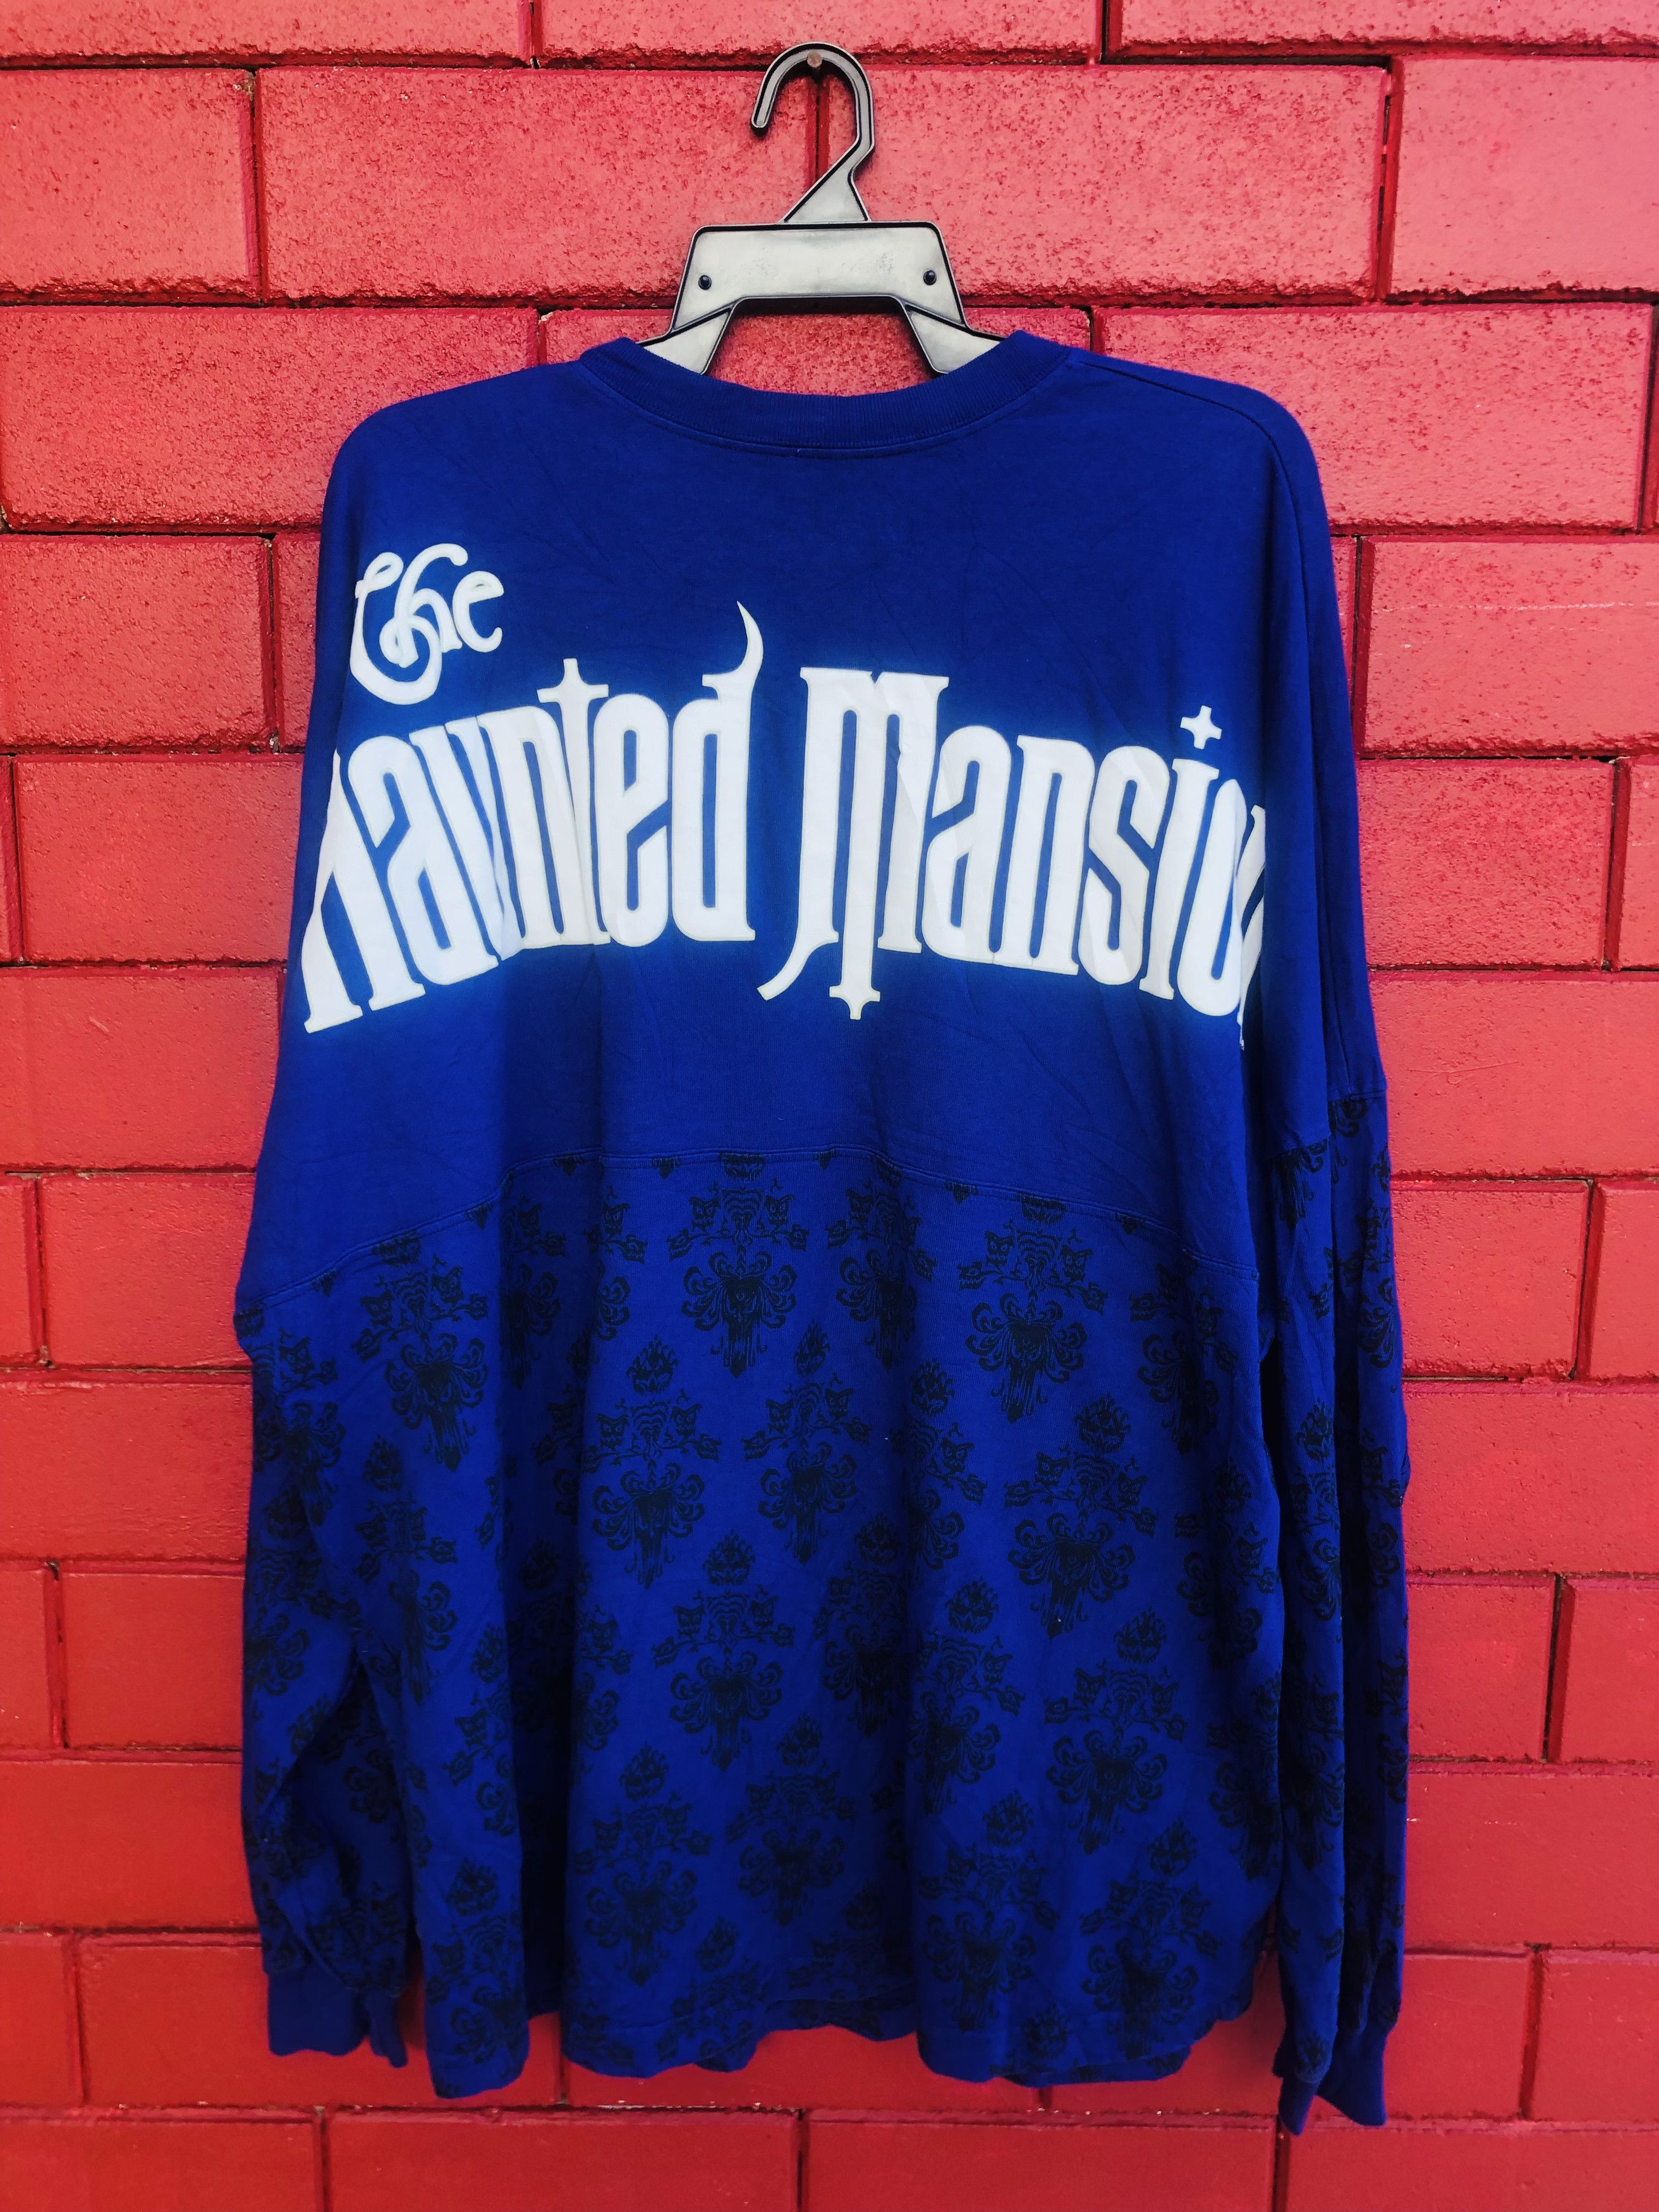 Vintage Vintage The Hunted Mansion Movie Streetwear Fashion Style Size US XL / EU 56 / 4 - 2 Preview